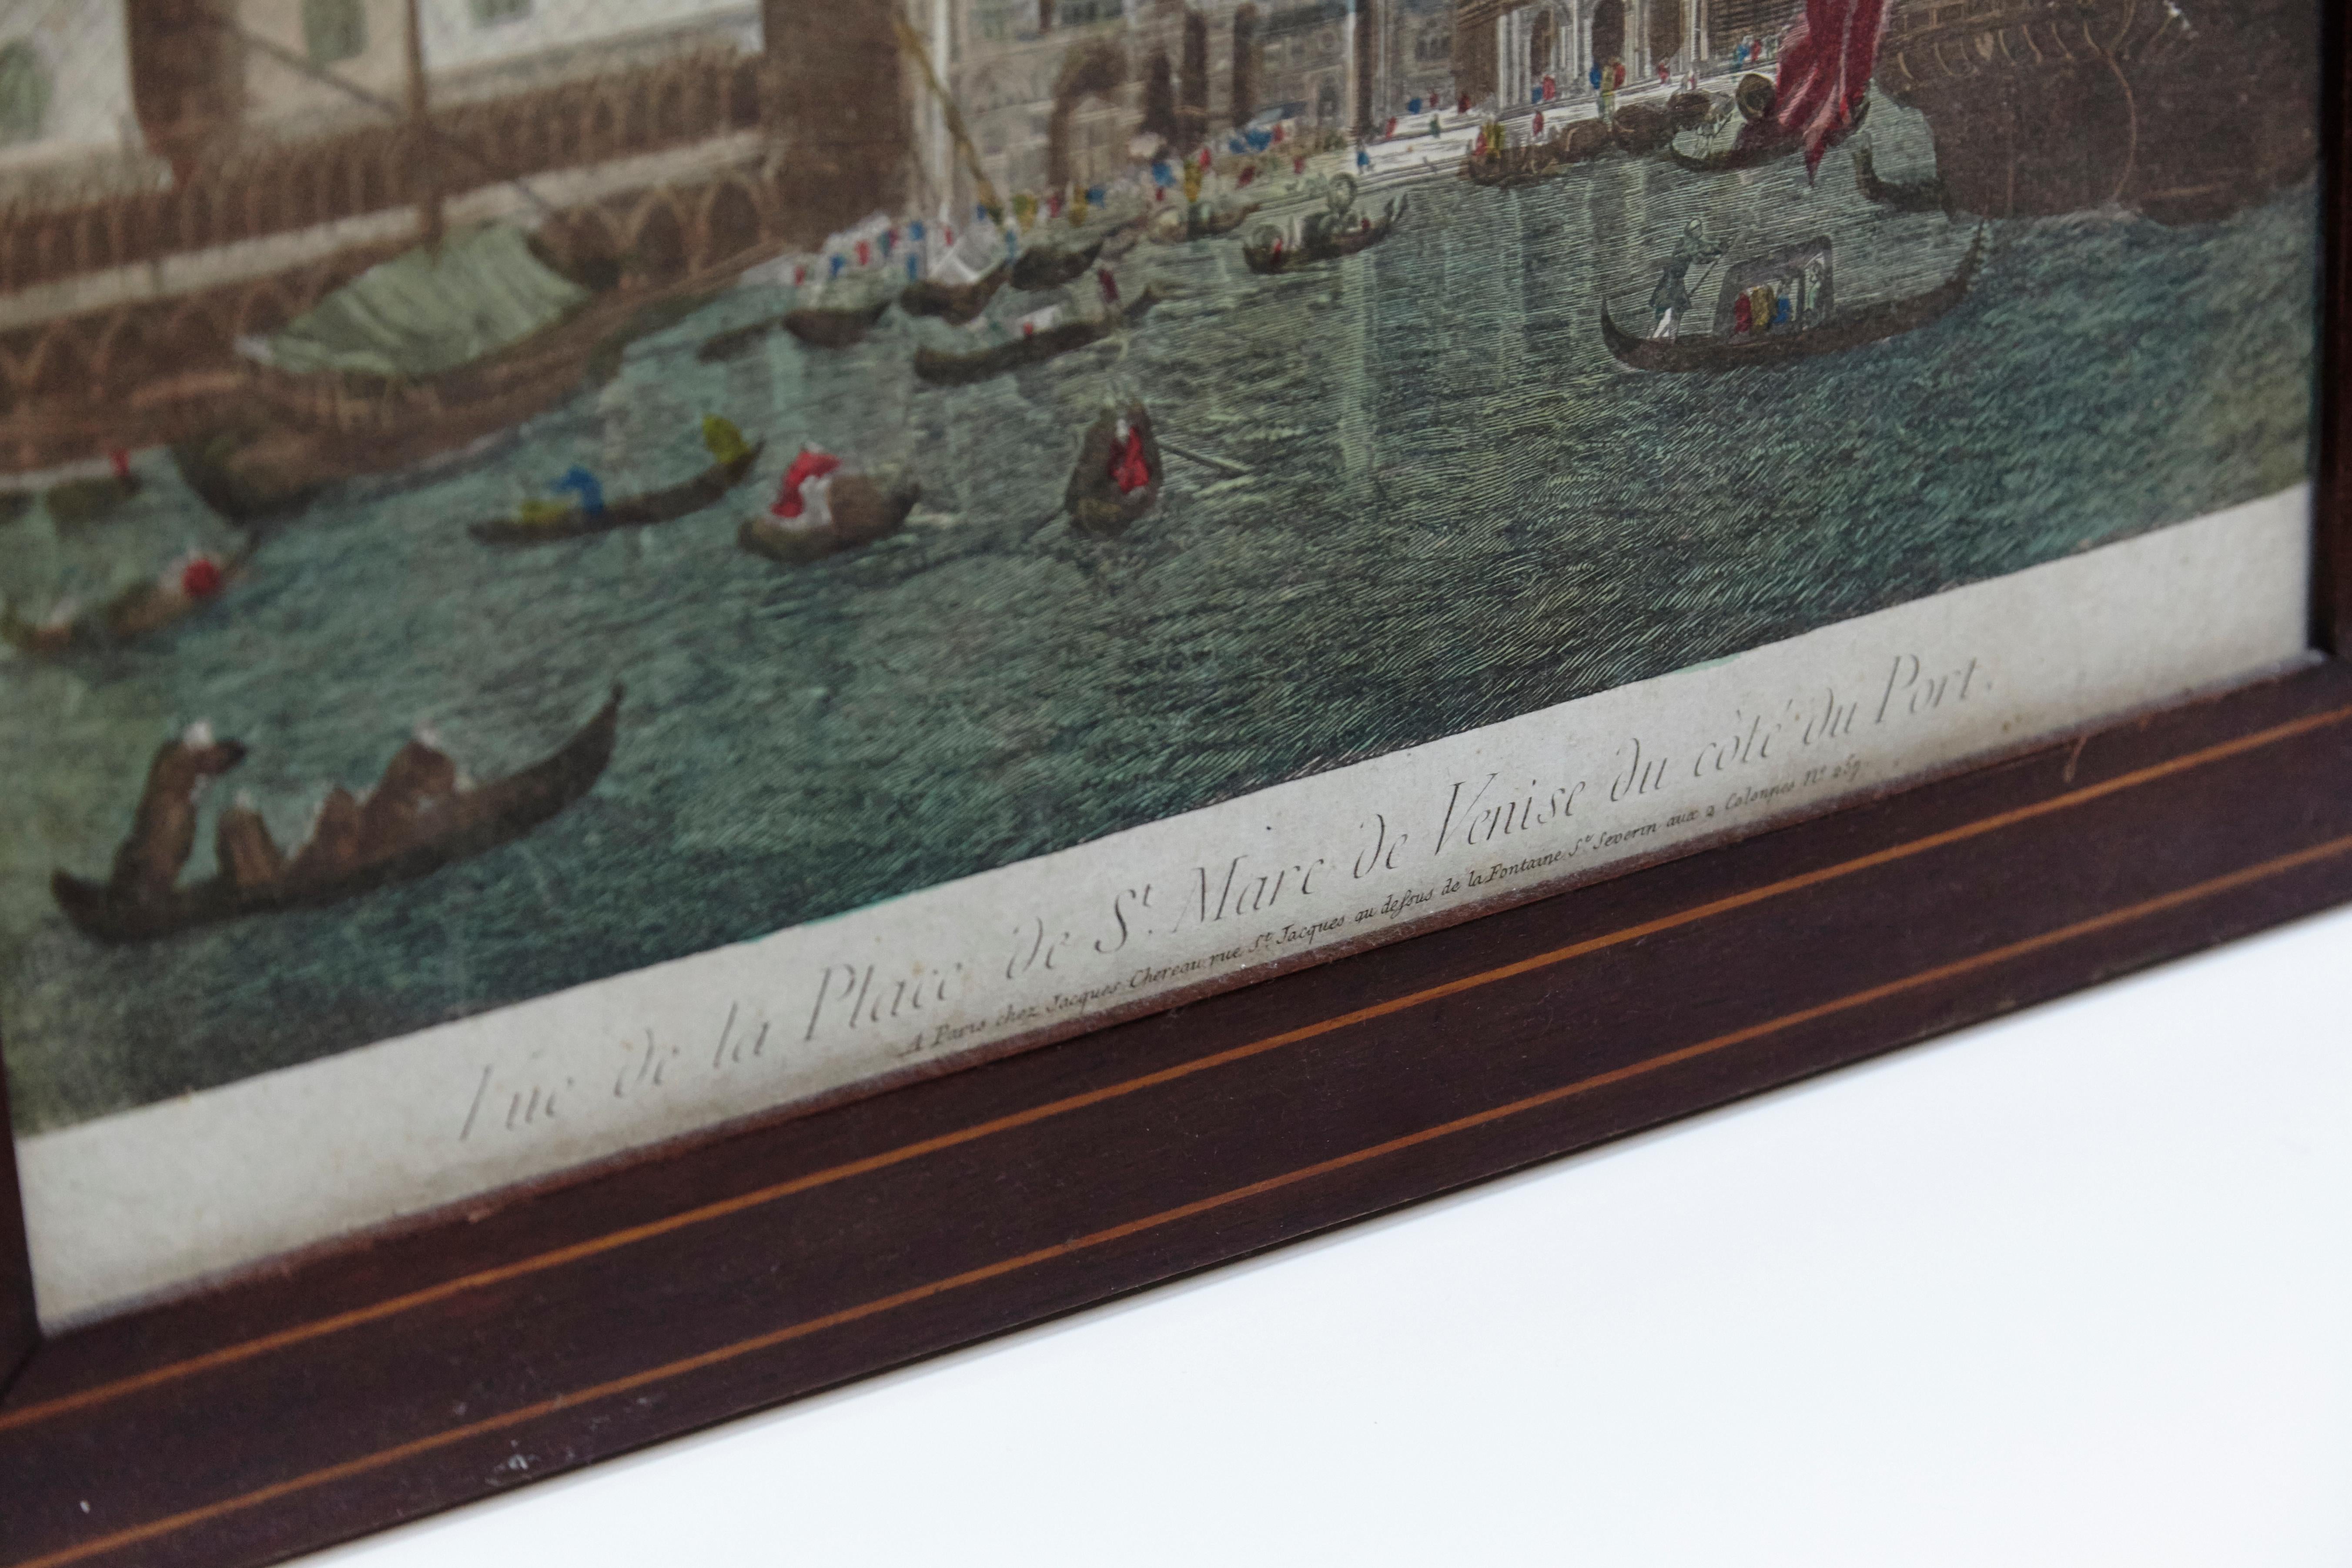 Paper Color Lithography of Venice, 18th Century